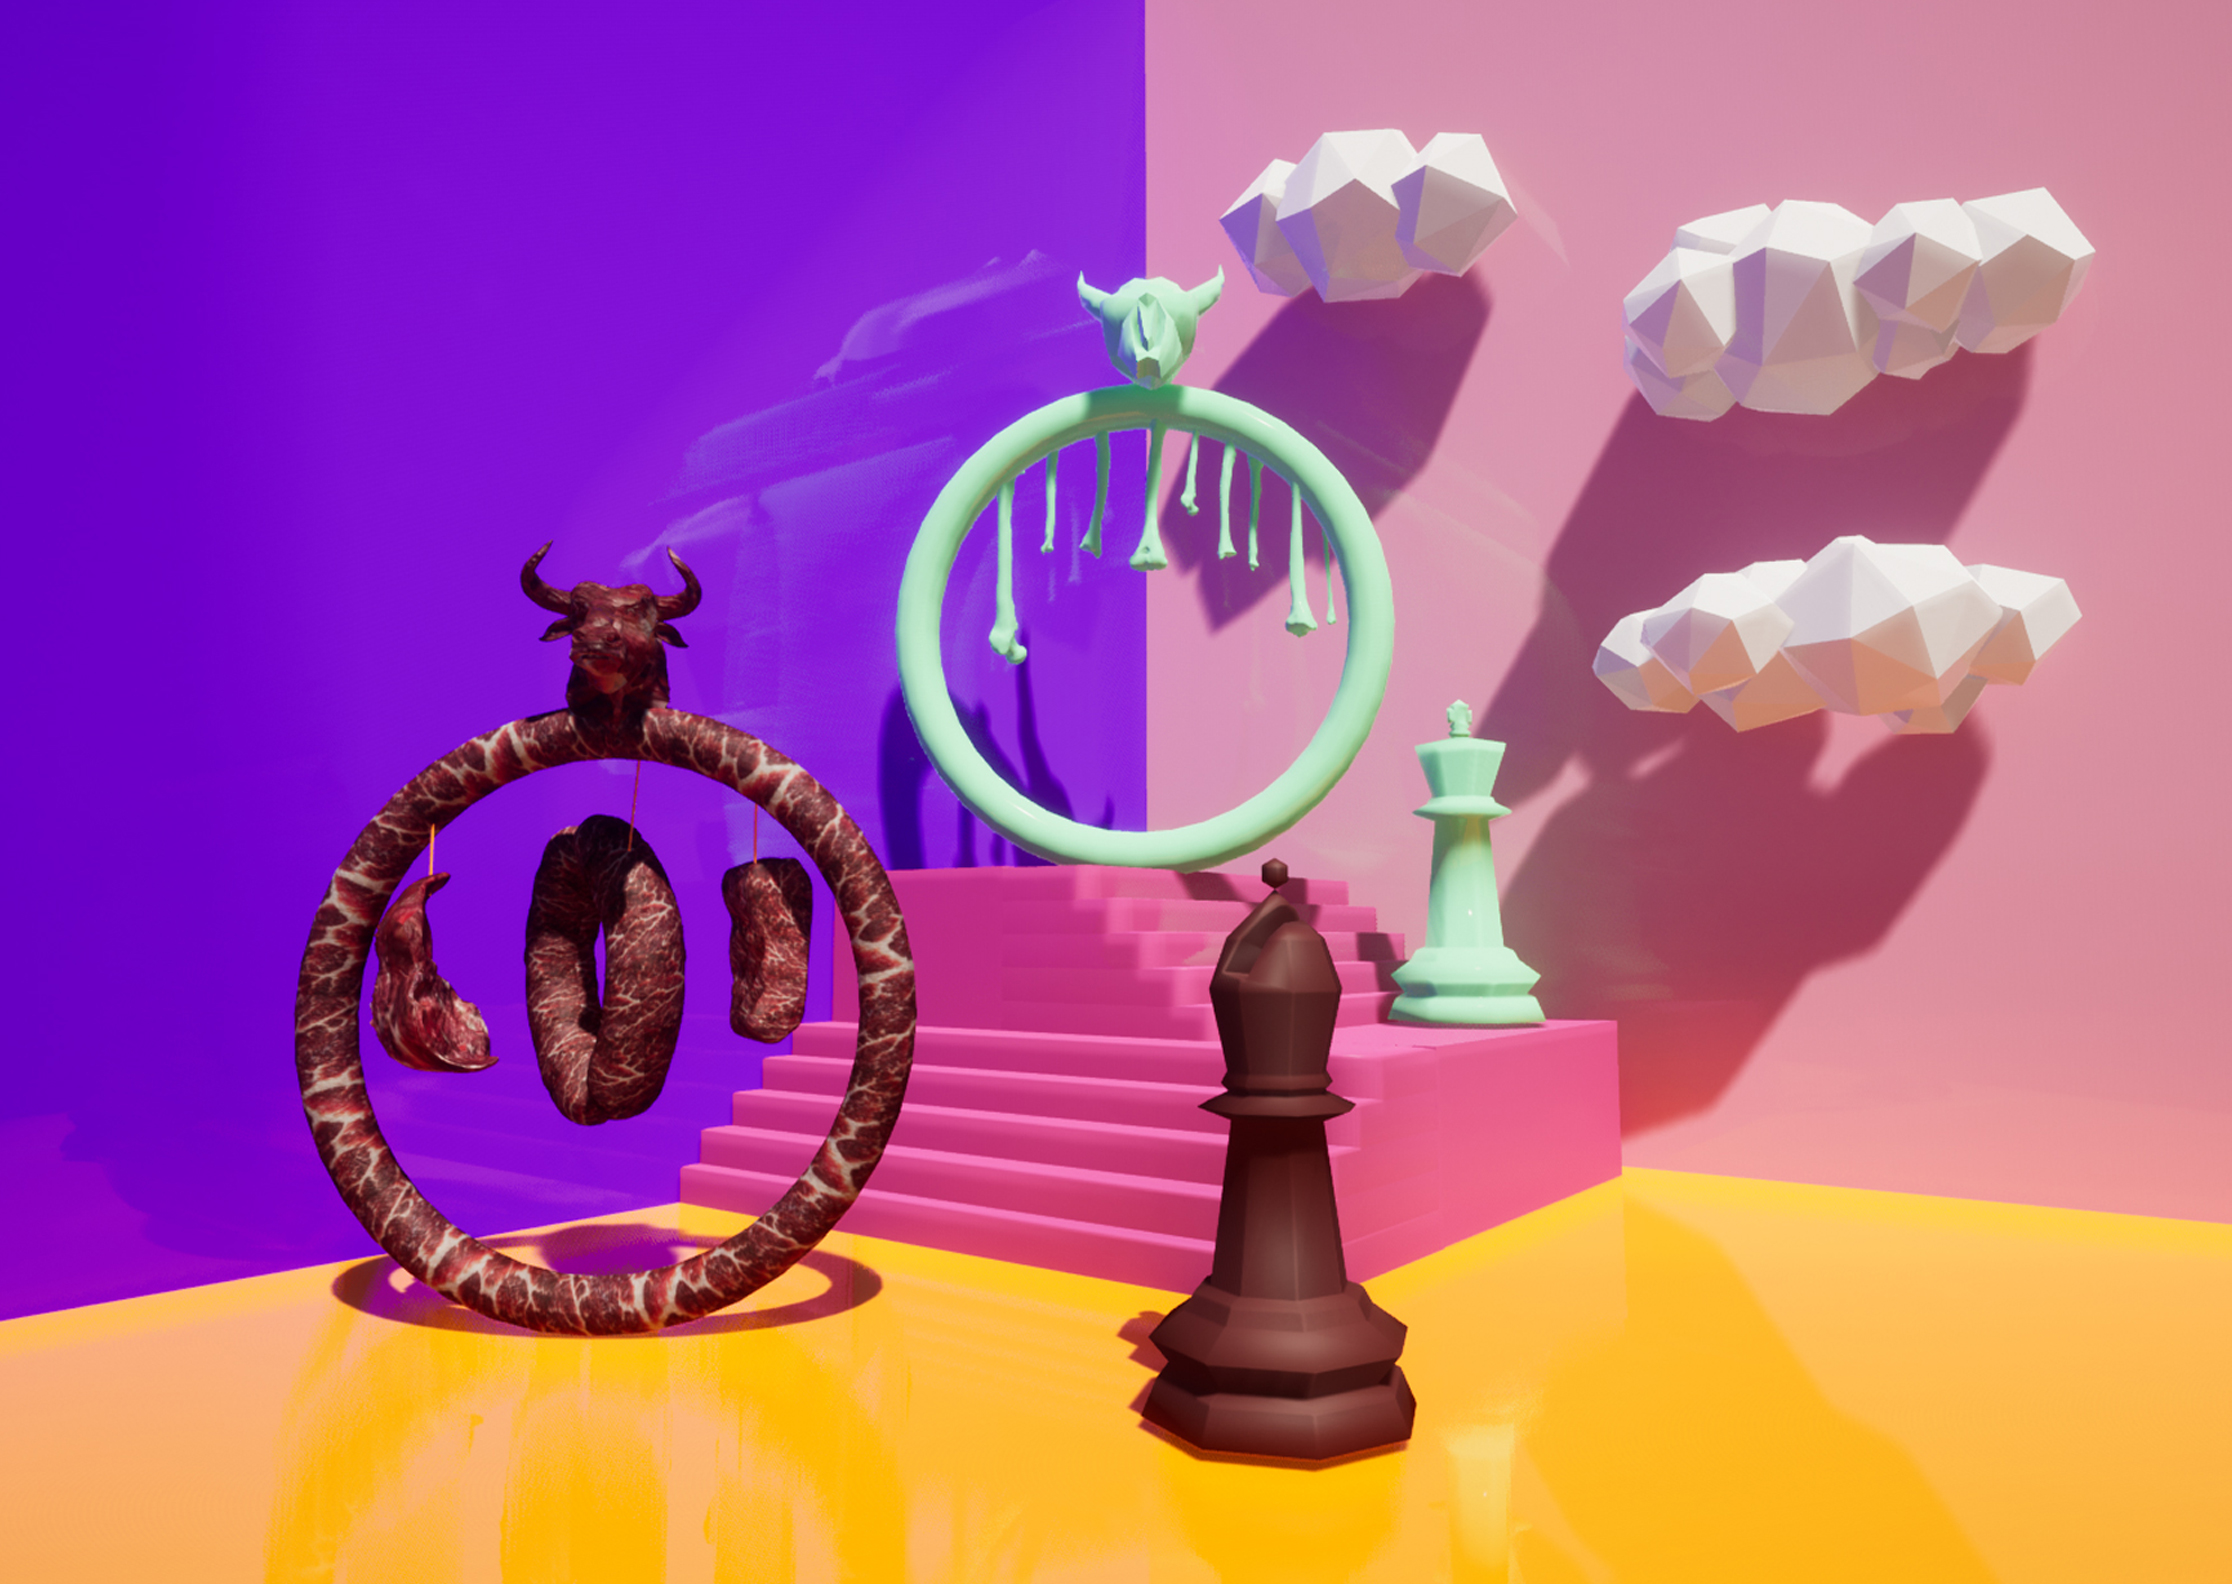 3d digitally modelled and rendered scene featuring chess pieces, salami and clouds